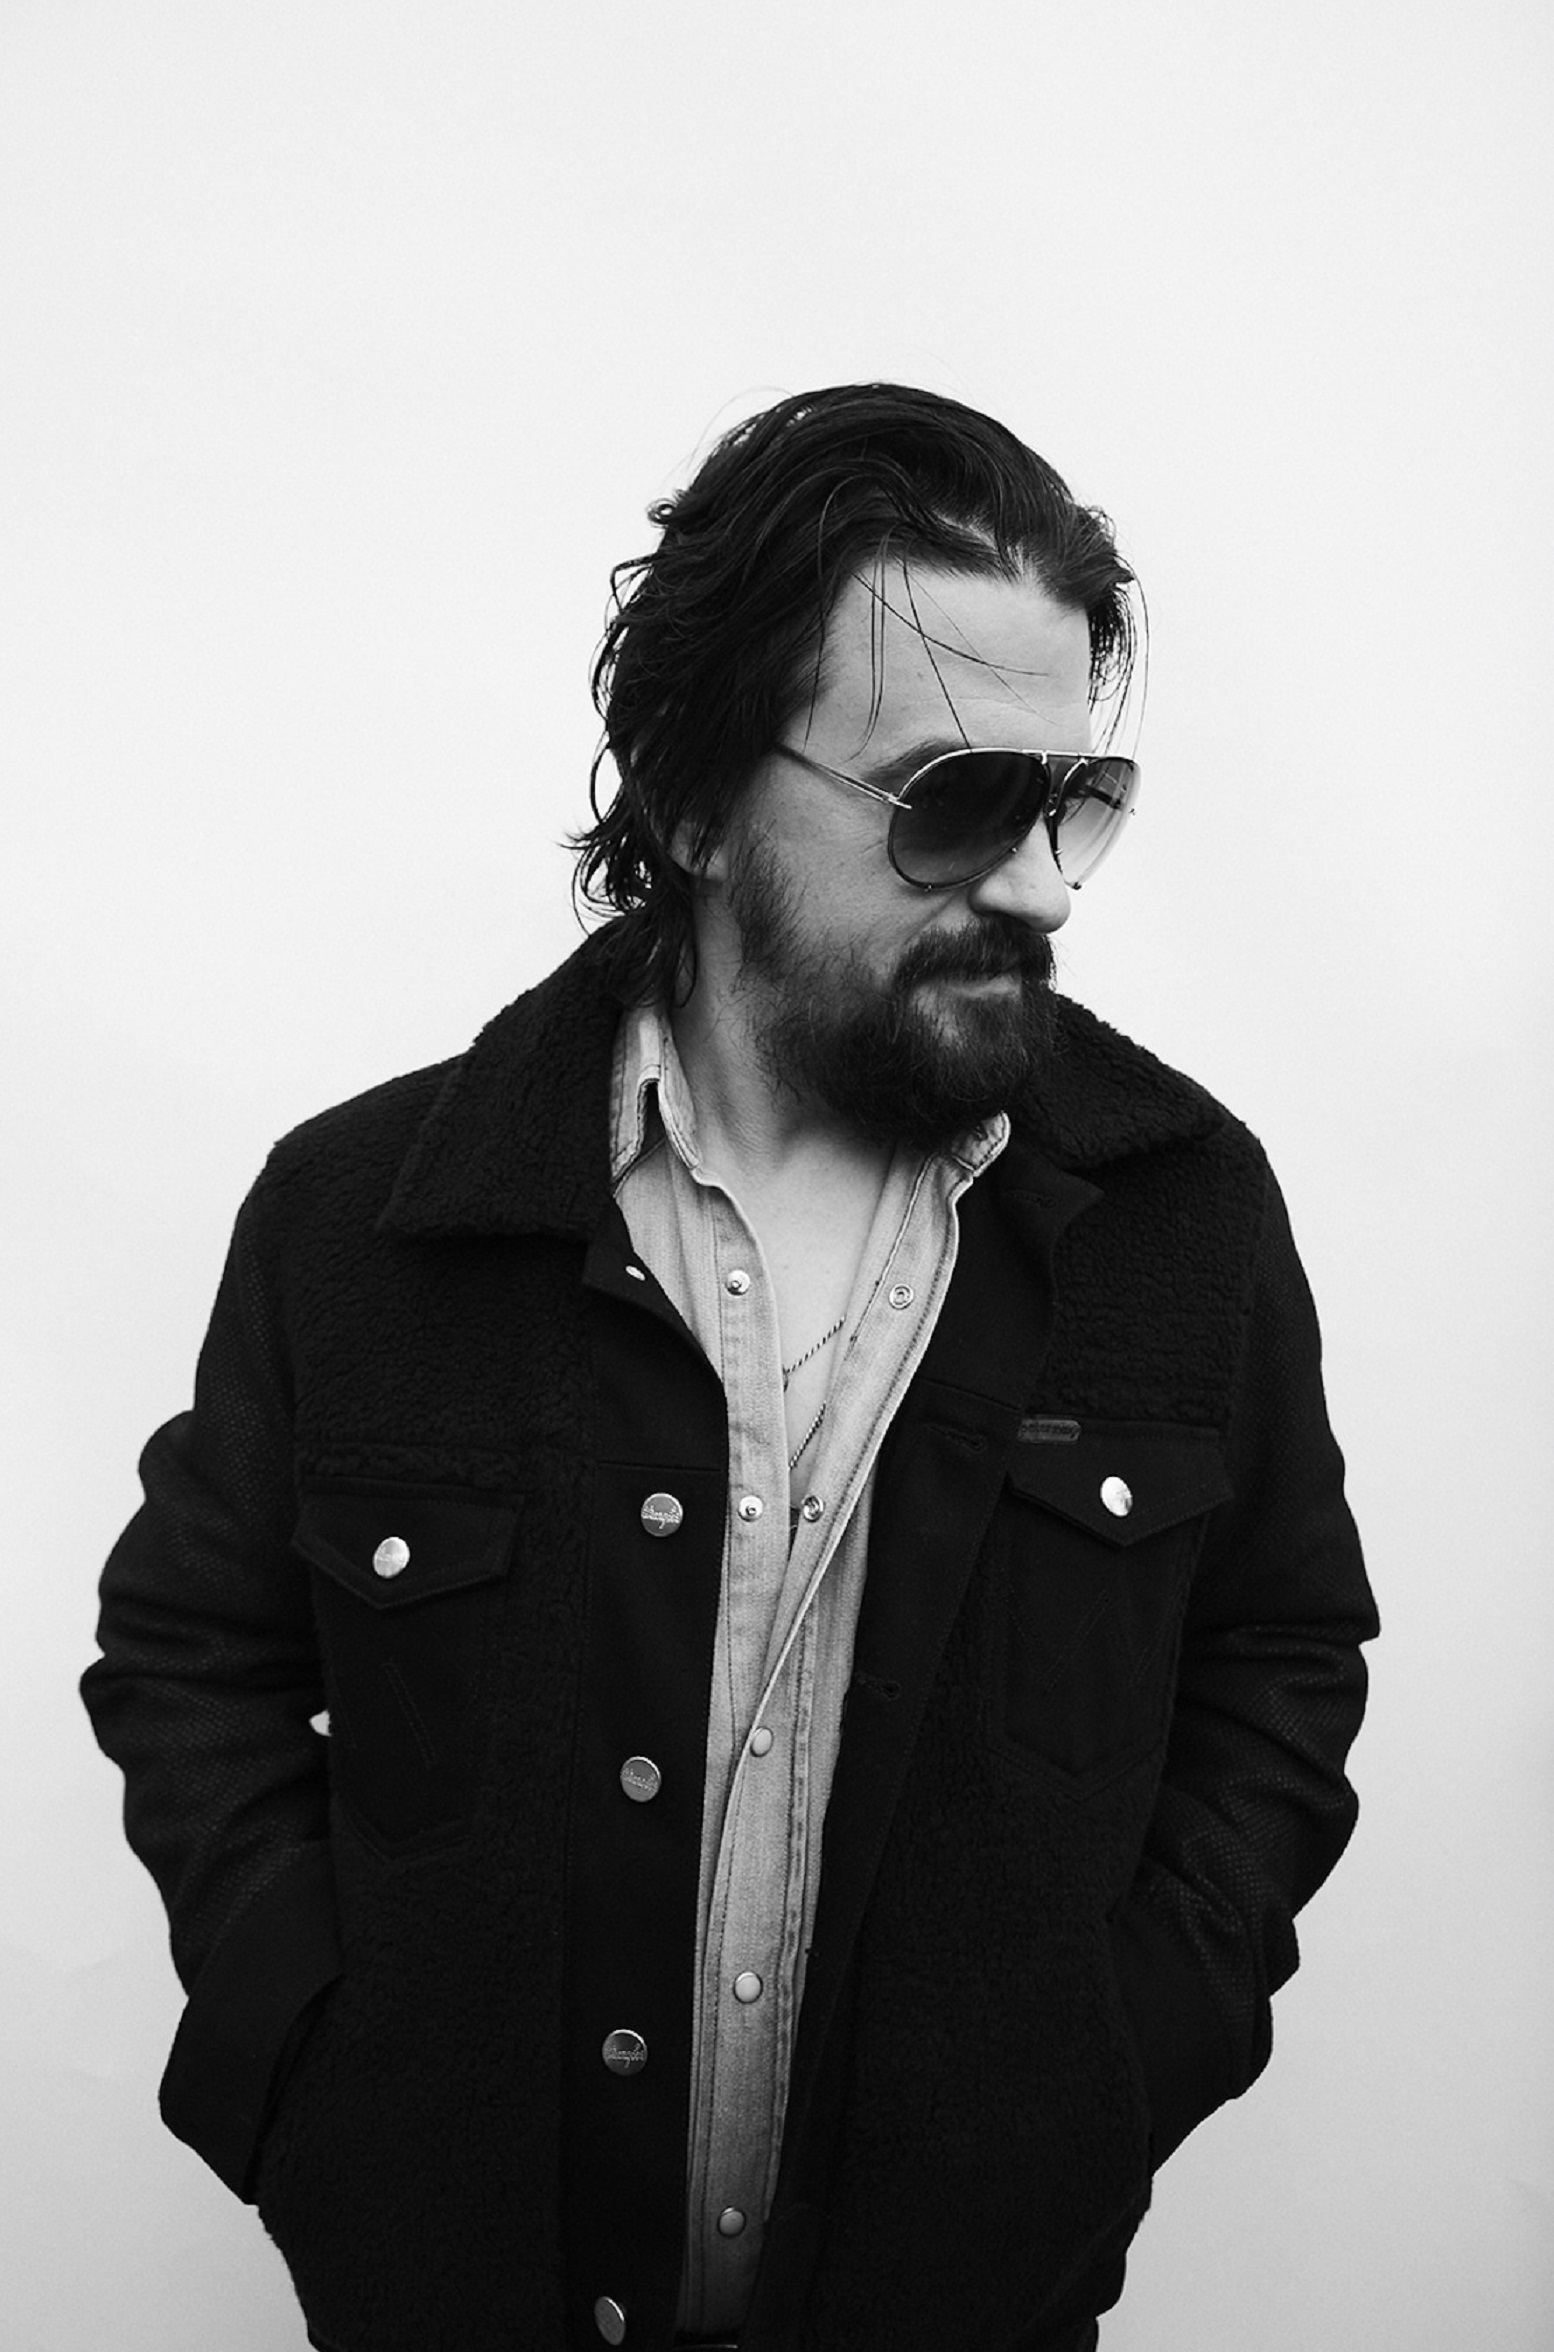 Shooter Jennings performing Zevon at the Roxy in LA Feb 3